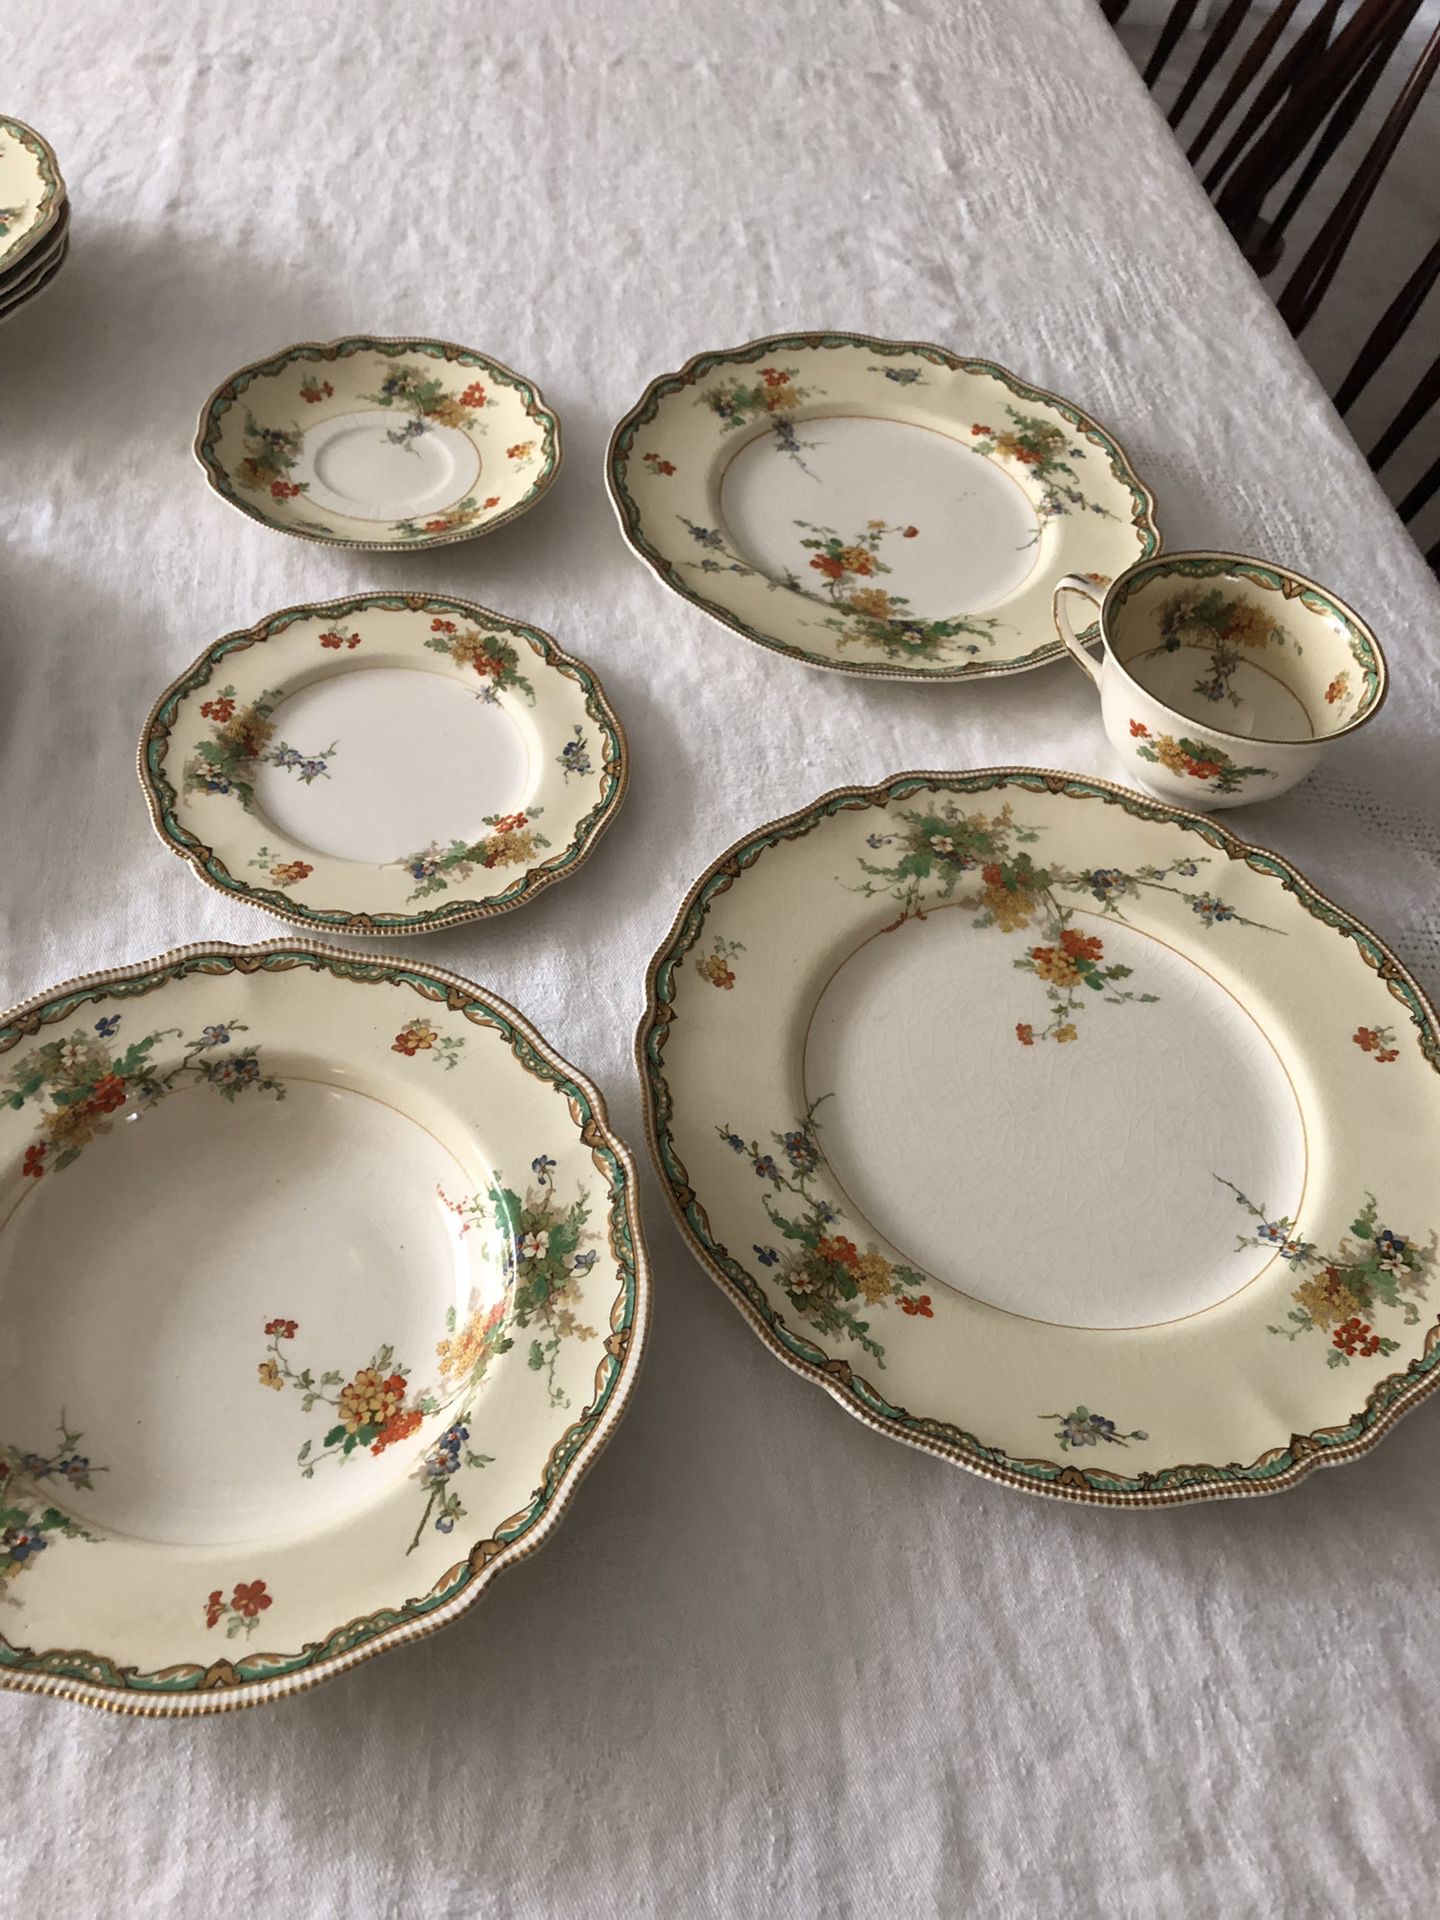 35 piece antique old Staffordshire Johnson brothers England china